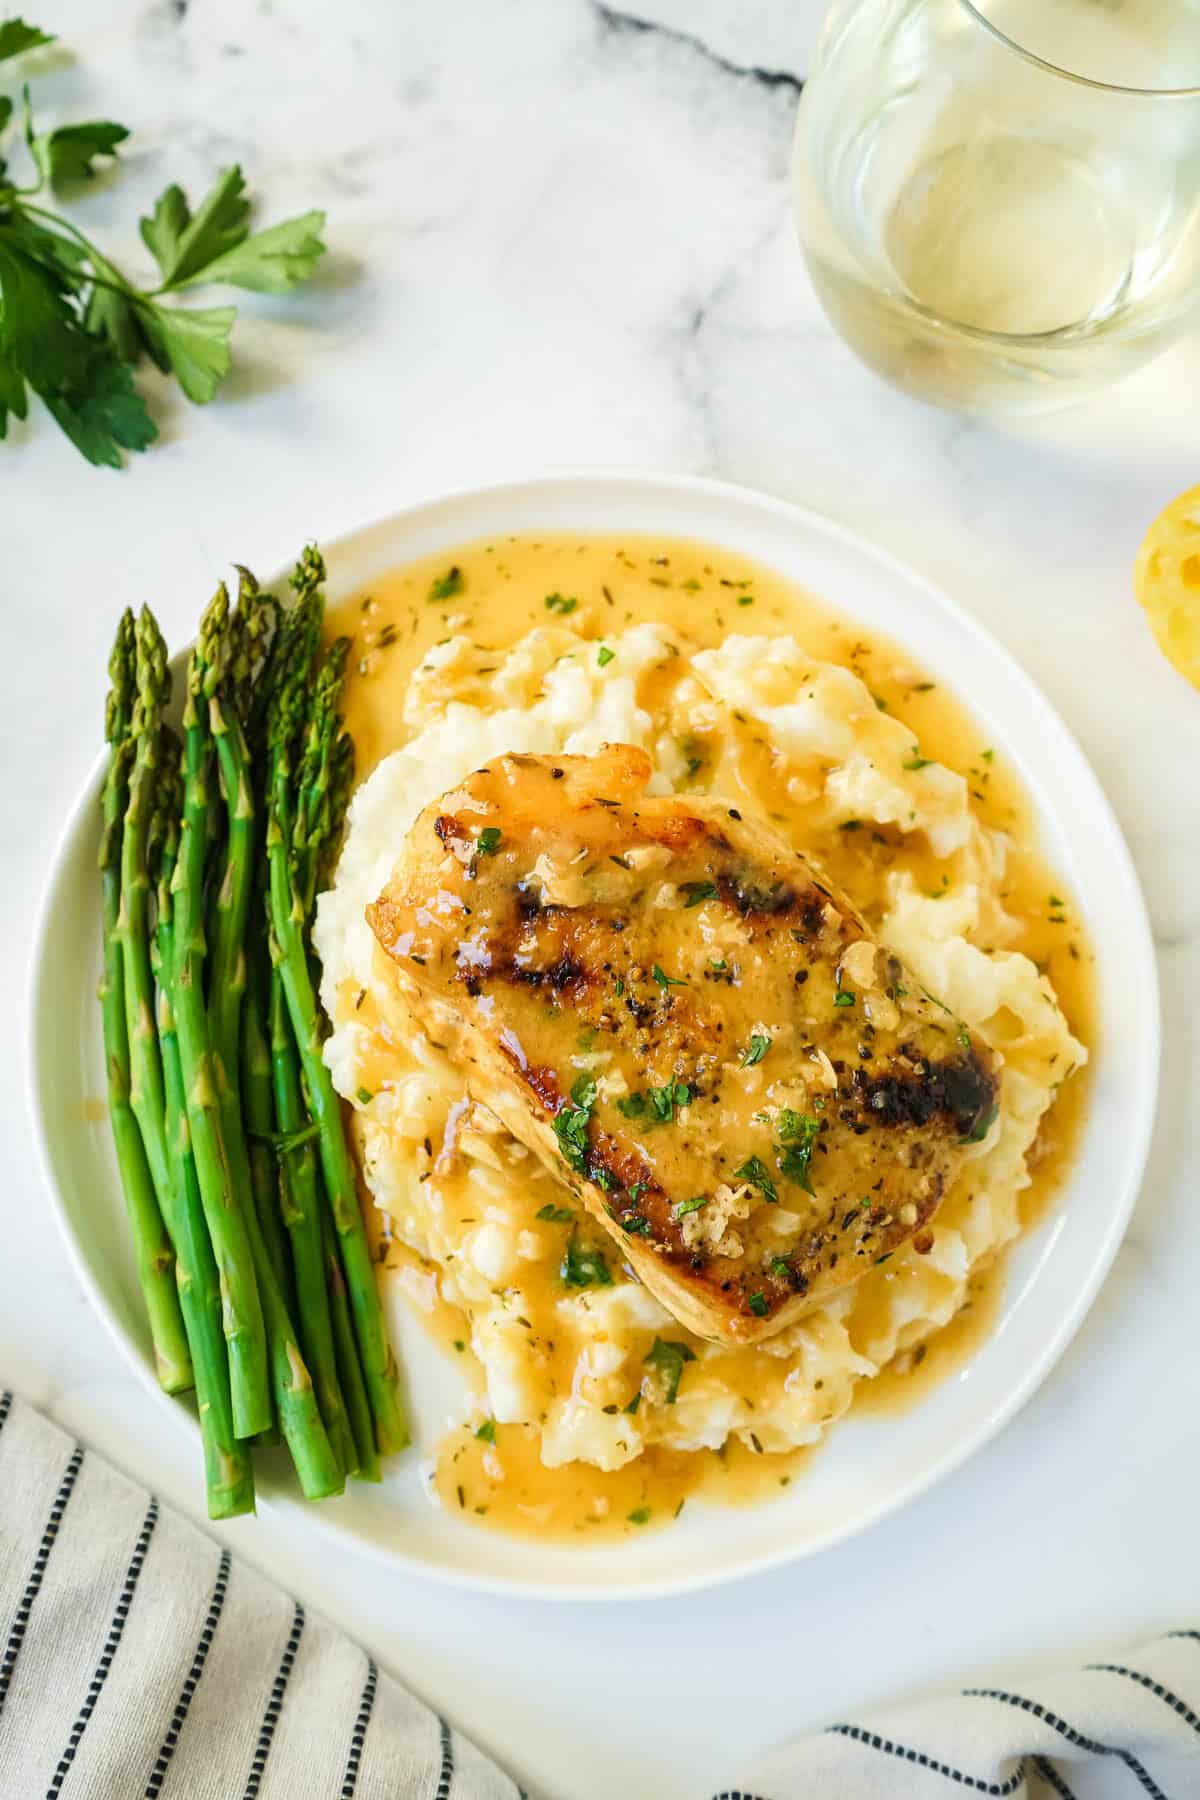 Chicken with white wine sauce without cream on a white plate with mashed potatoes and asparagus.